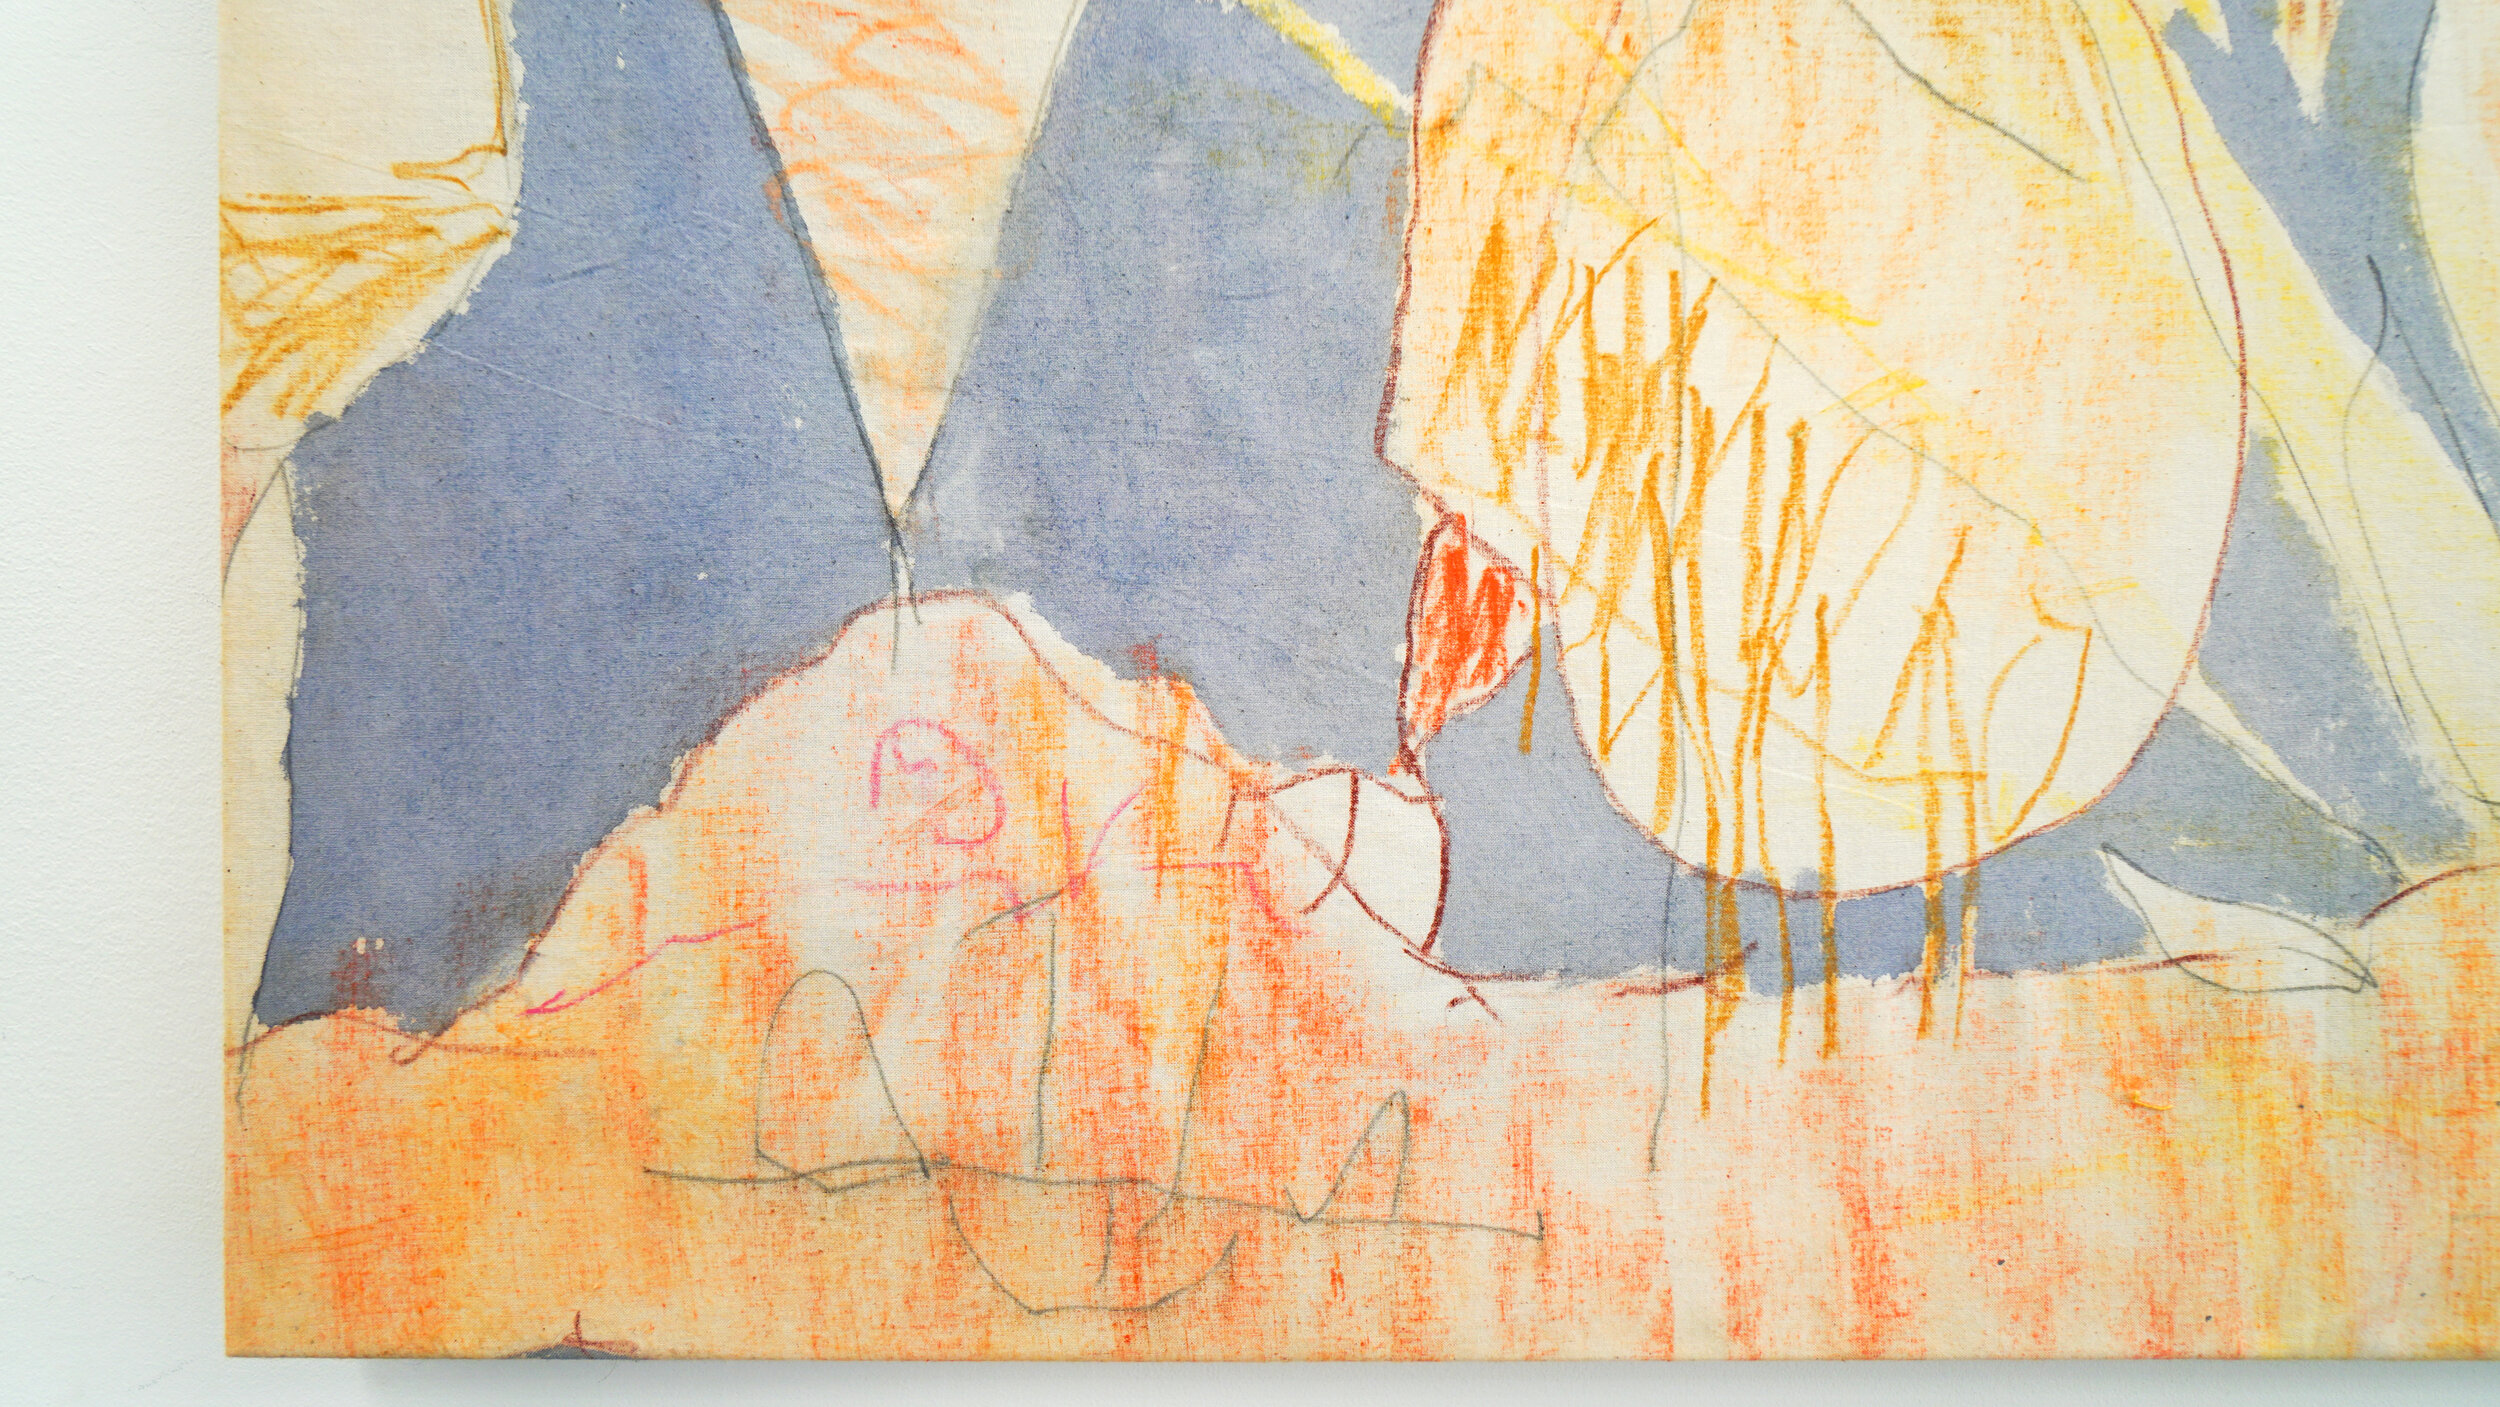  Ross Simonini   The Sures , 2020 (detail) Watercolor, tempera, wax crayon, and graphite on muslin  24 x 60 inches 